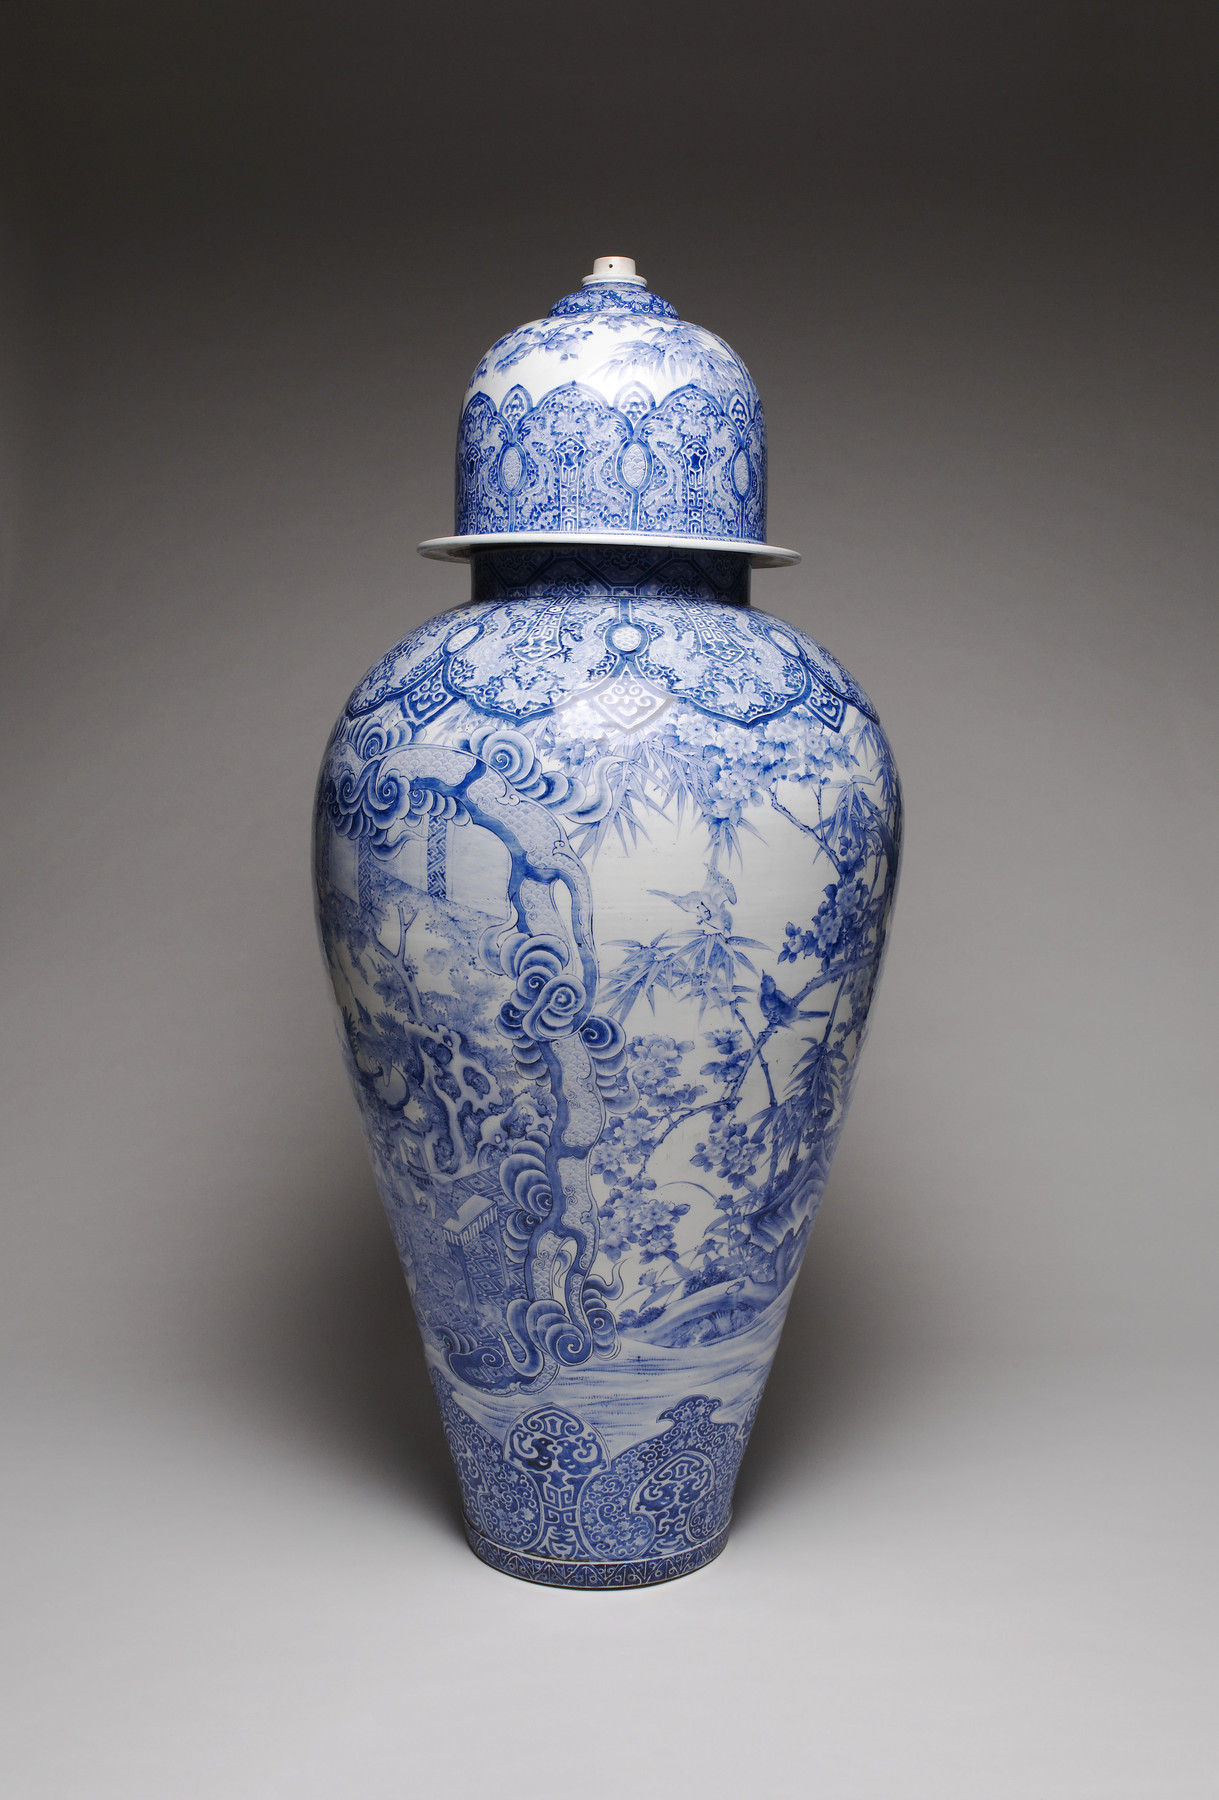 Image for Arita Ware Covered Jar with a Panel Depicting a Collection of Antiques in a Chinese Garden